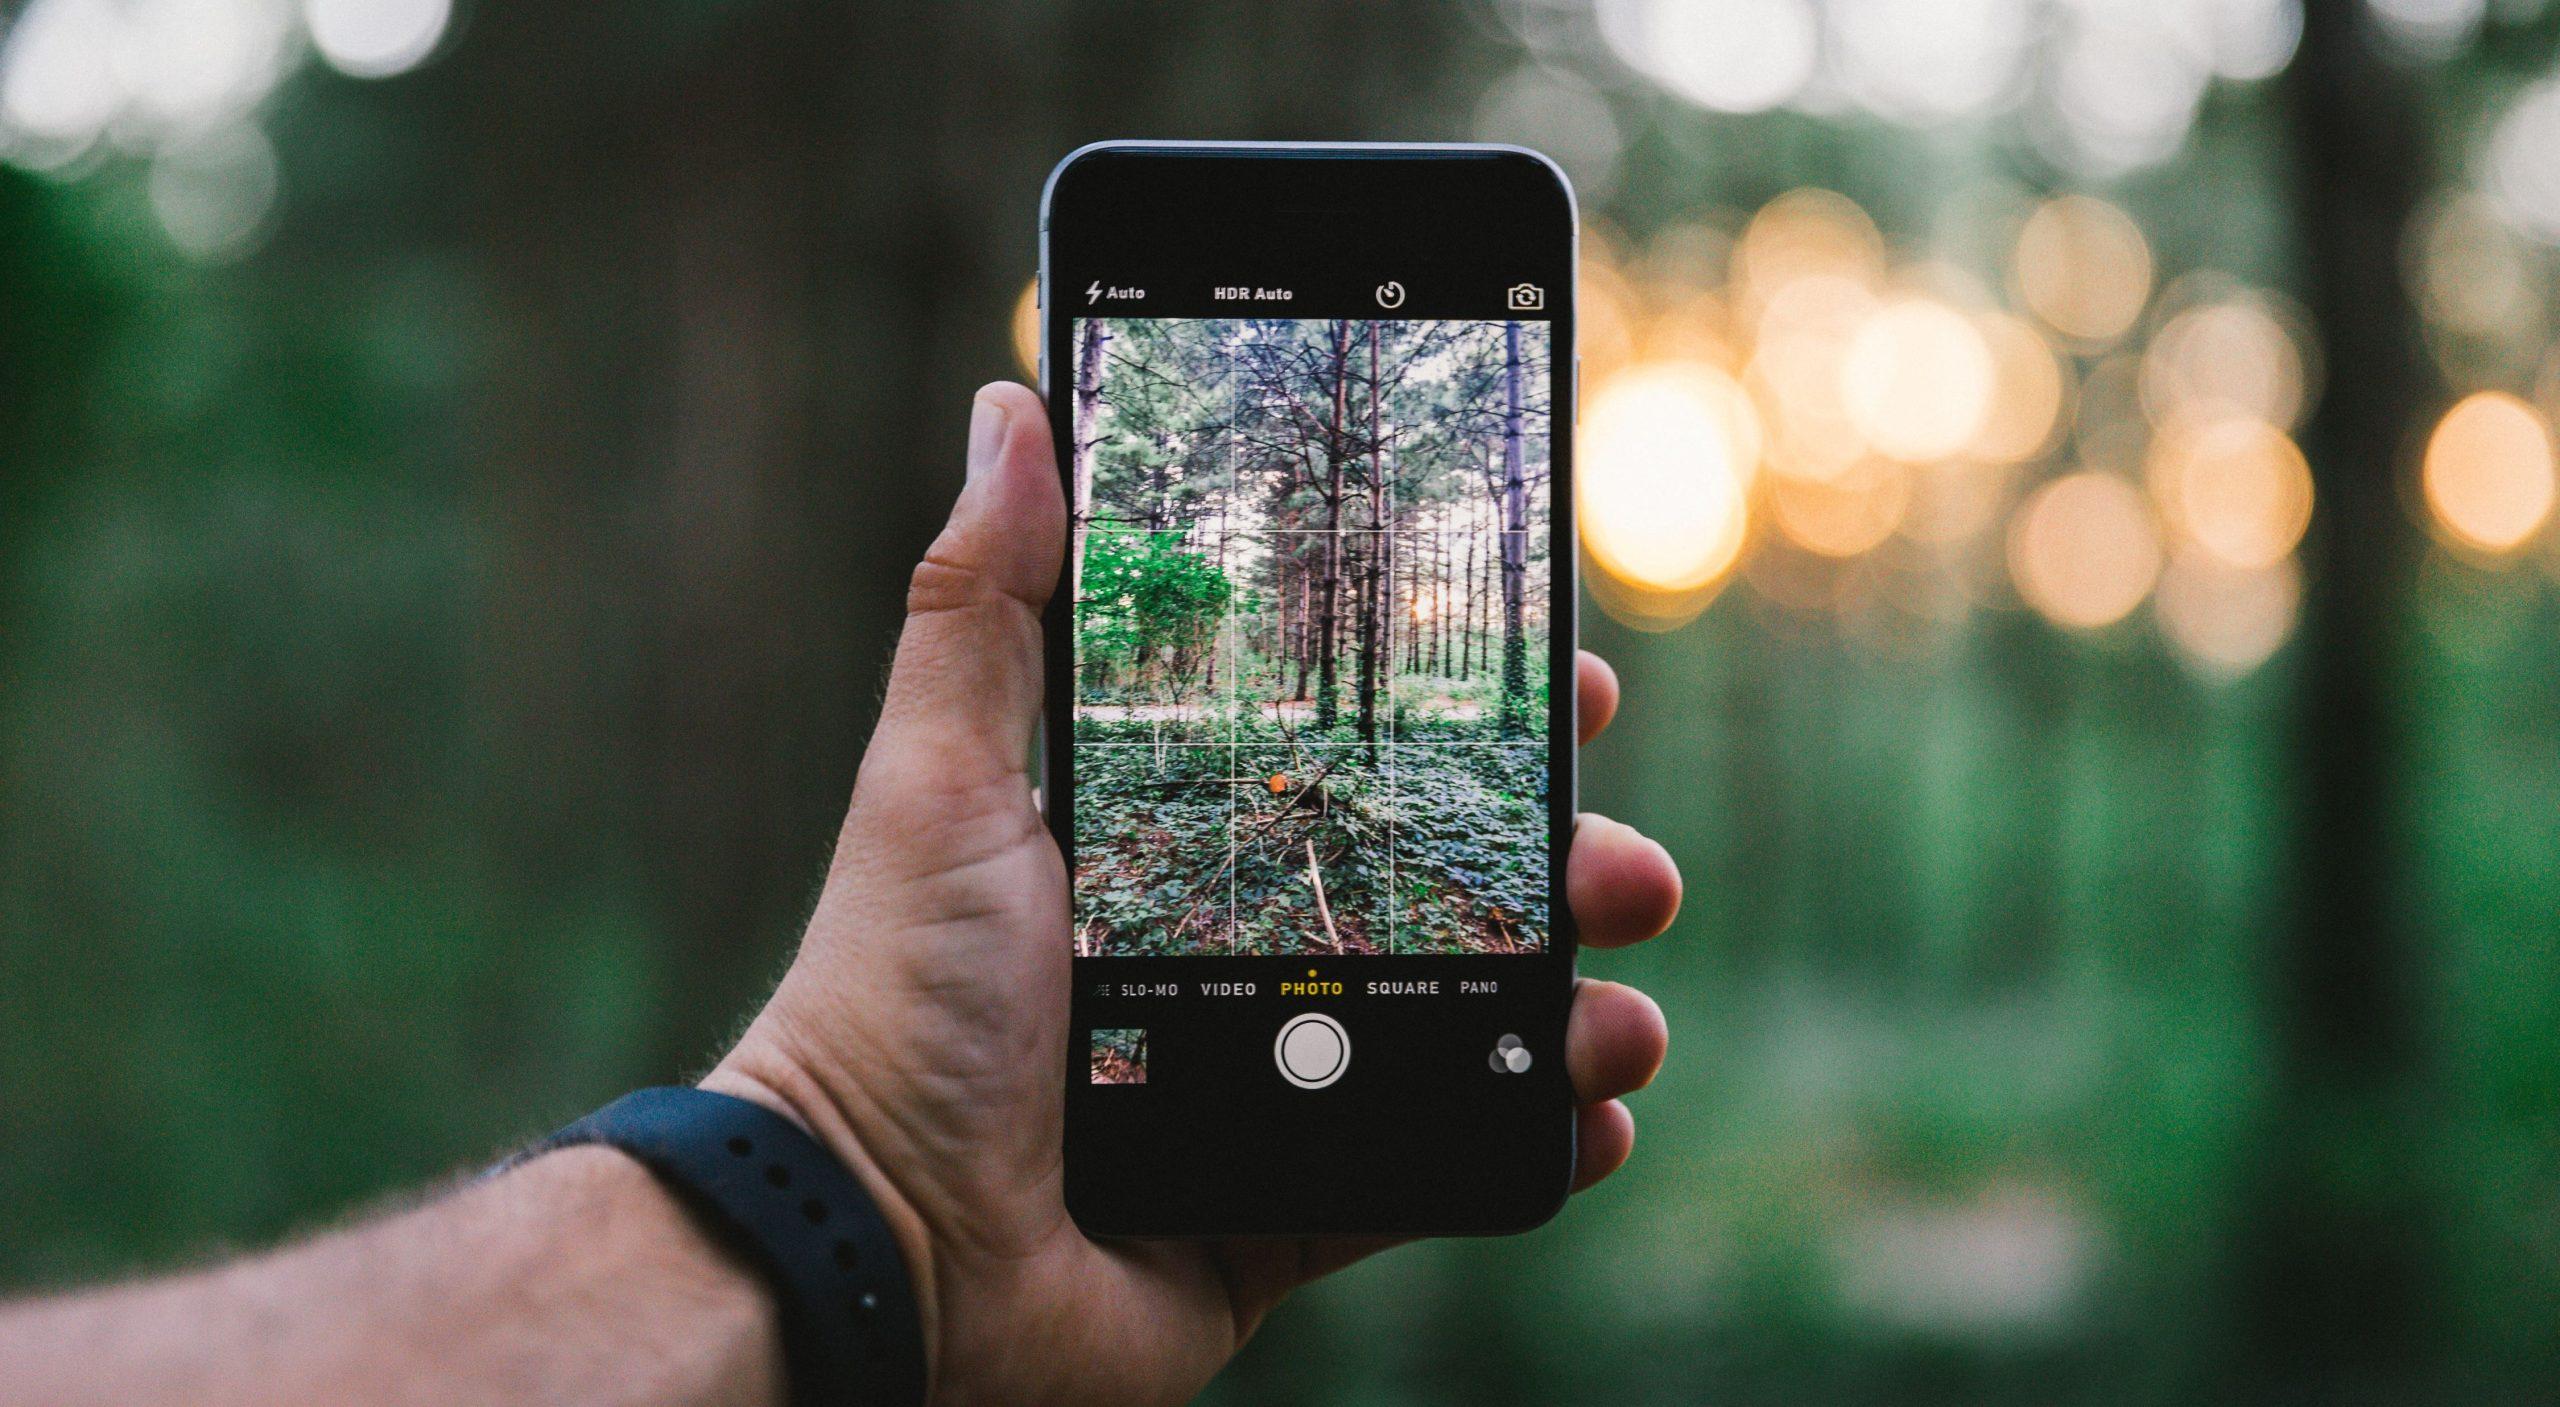 Person holding a phone taking a photo in the woods.